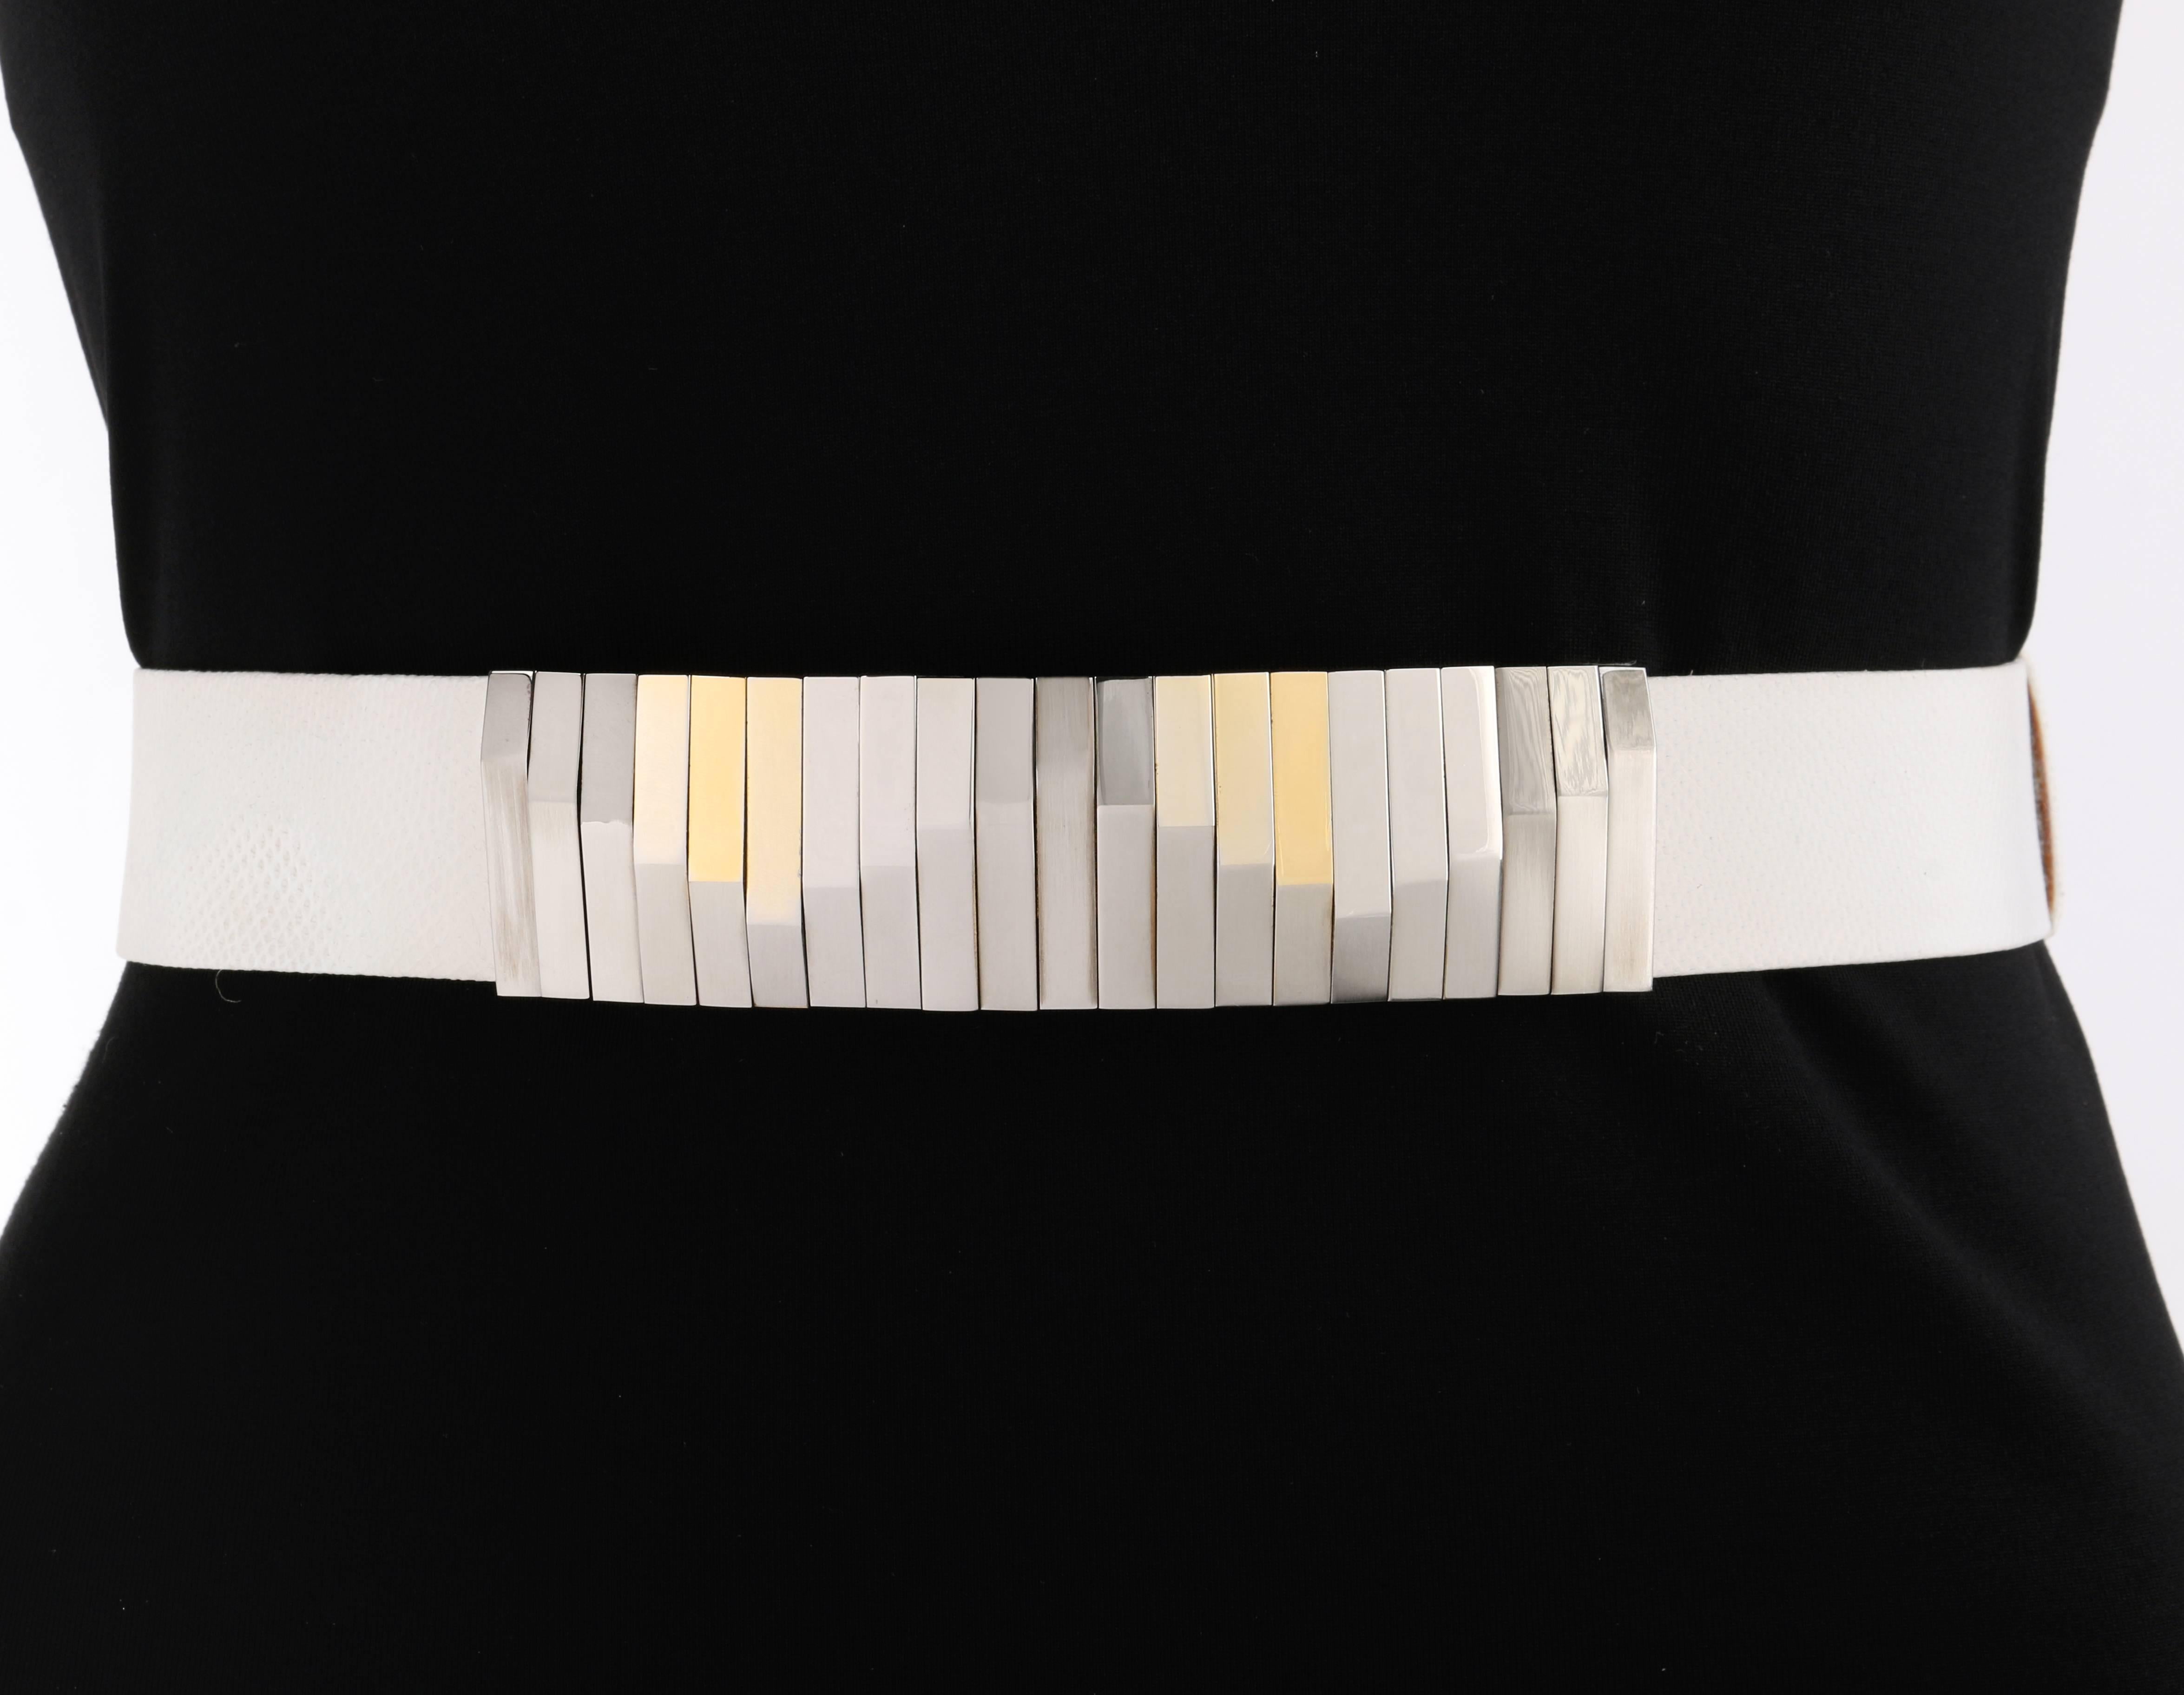 Vintage Judith Leiber c.1980's white lizard skin / leather statement waist belt. White lizard skin leather adjustable sliding body. Two-tone silver and gold-toned metal geometric rectangular buckle. Belt fastens with single center front hook and